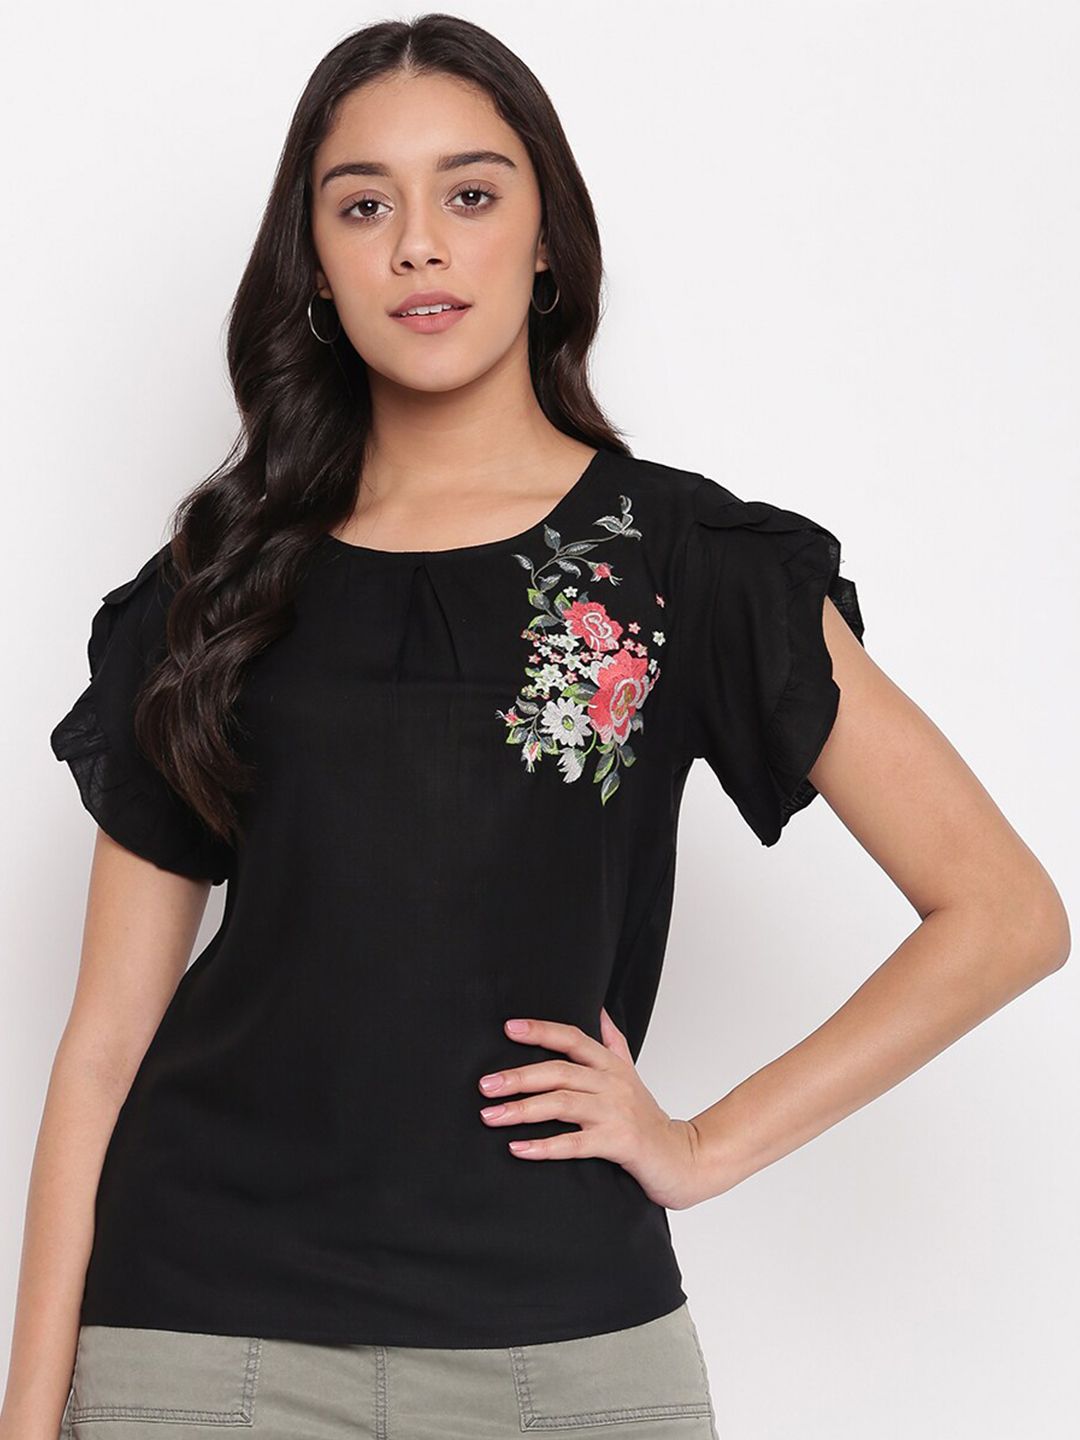 Miss Grace Black Floral Embroidered Top Price in India